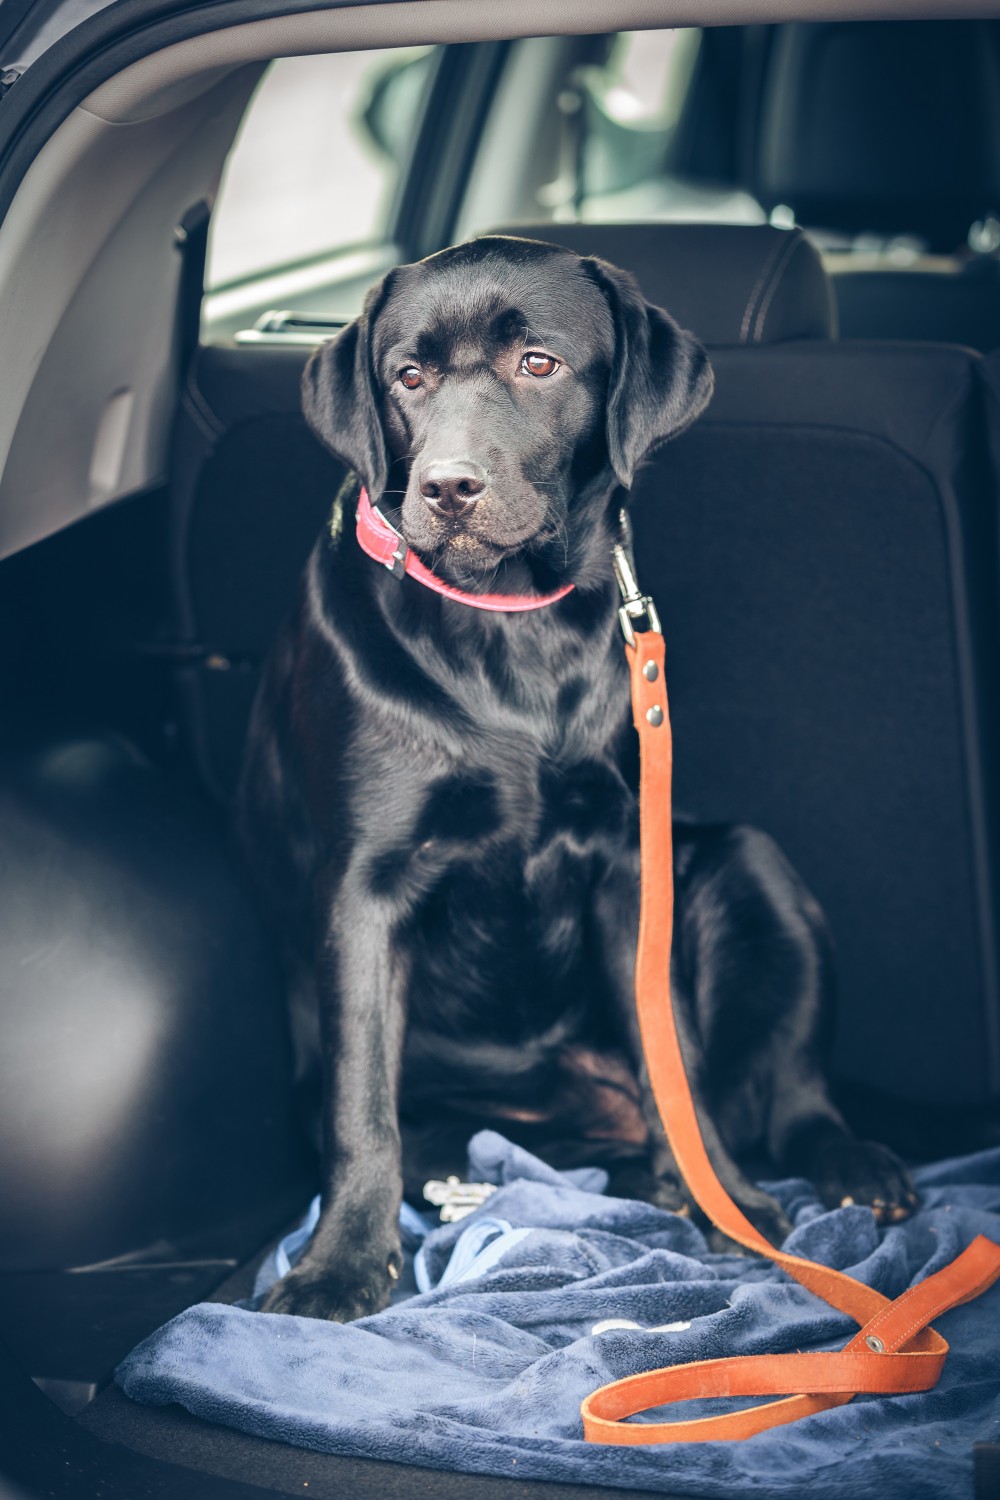 Black dog on leash in the backseat of a car